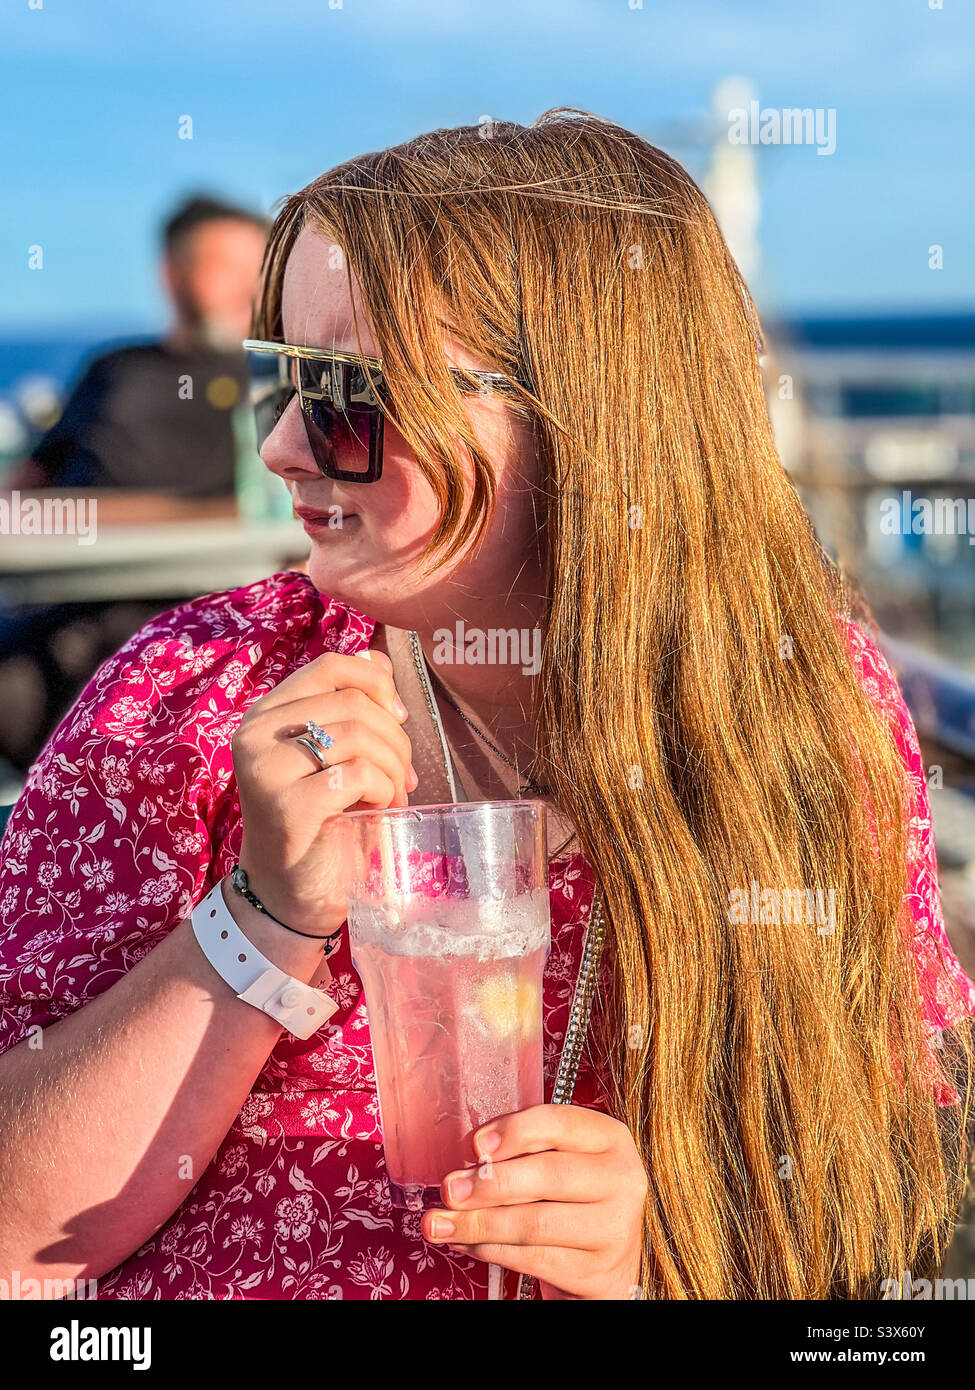 Young woman holding glass of lemonade Stock Photo